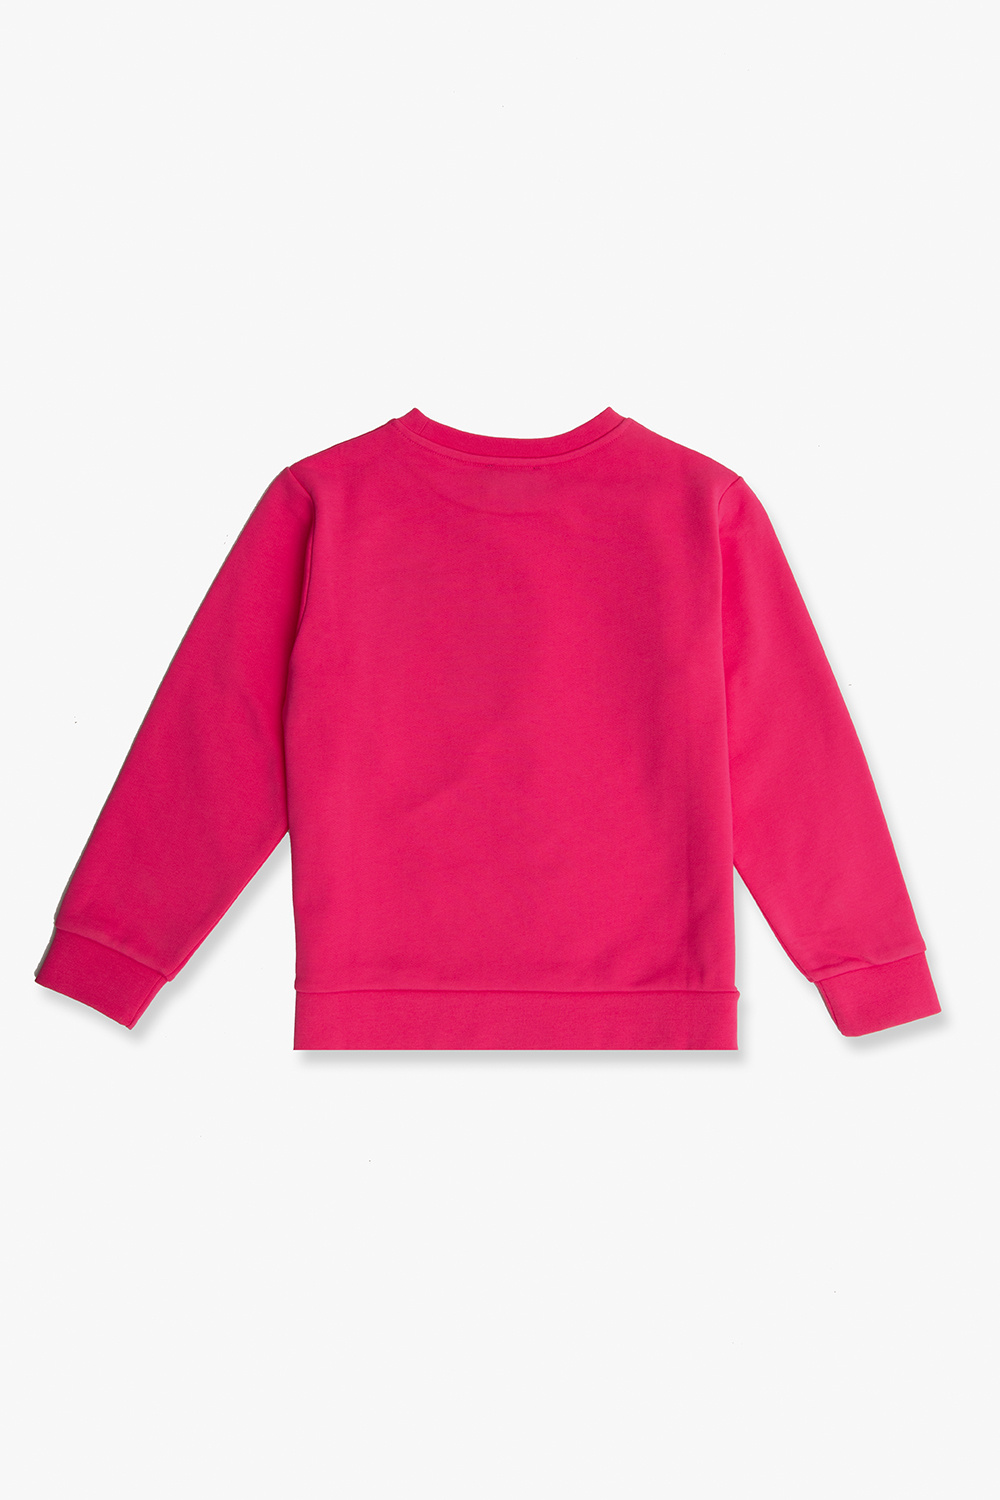 A.P.C. Kids selection of Gucci T-shirts and tops